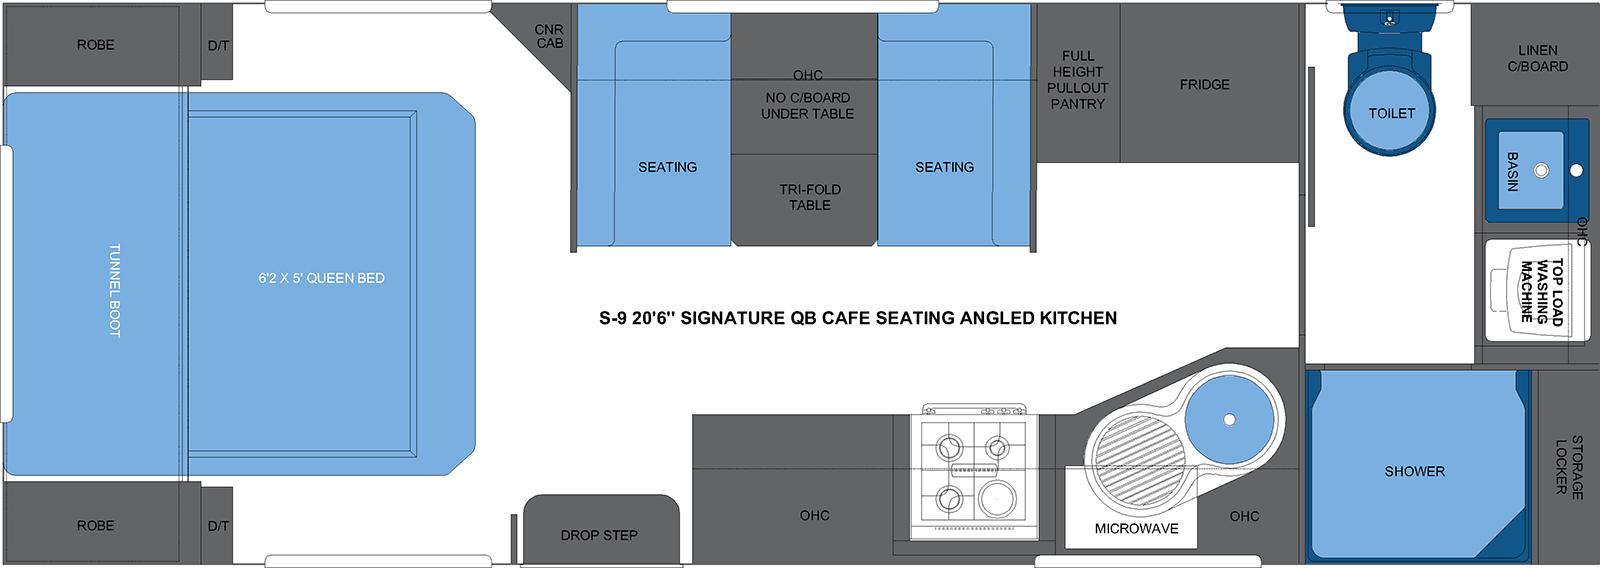 S-9 20'6 SIGNATURE QB CAFE SEATING ANGLED KITCHEN